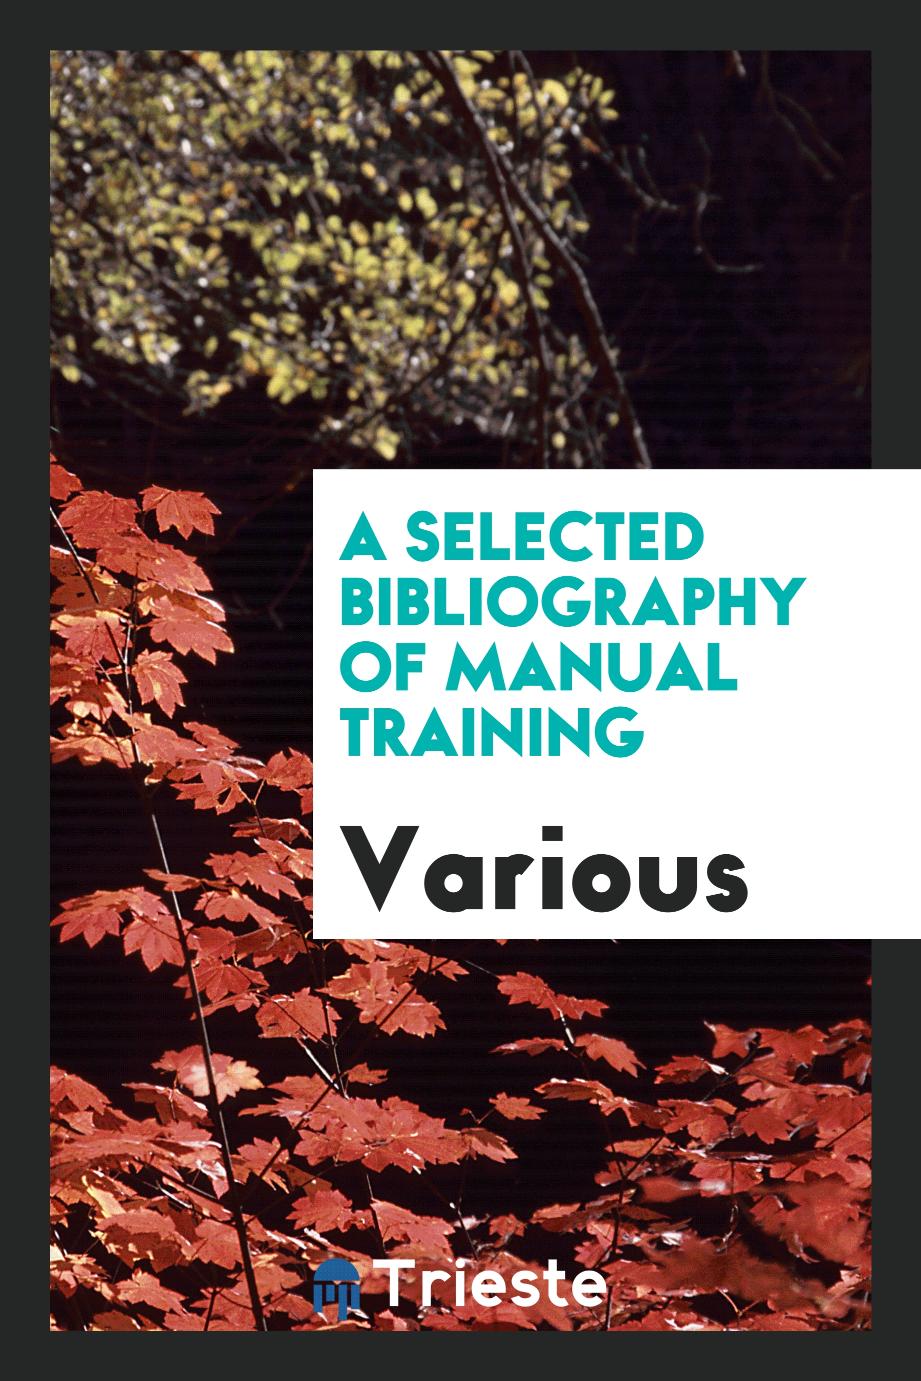 A Selected bibliography of manual training